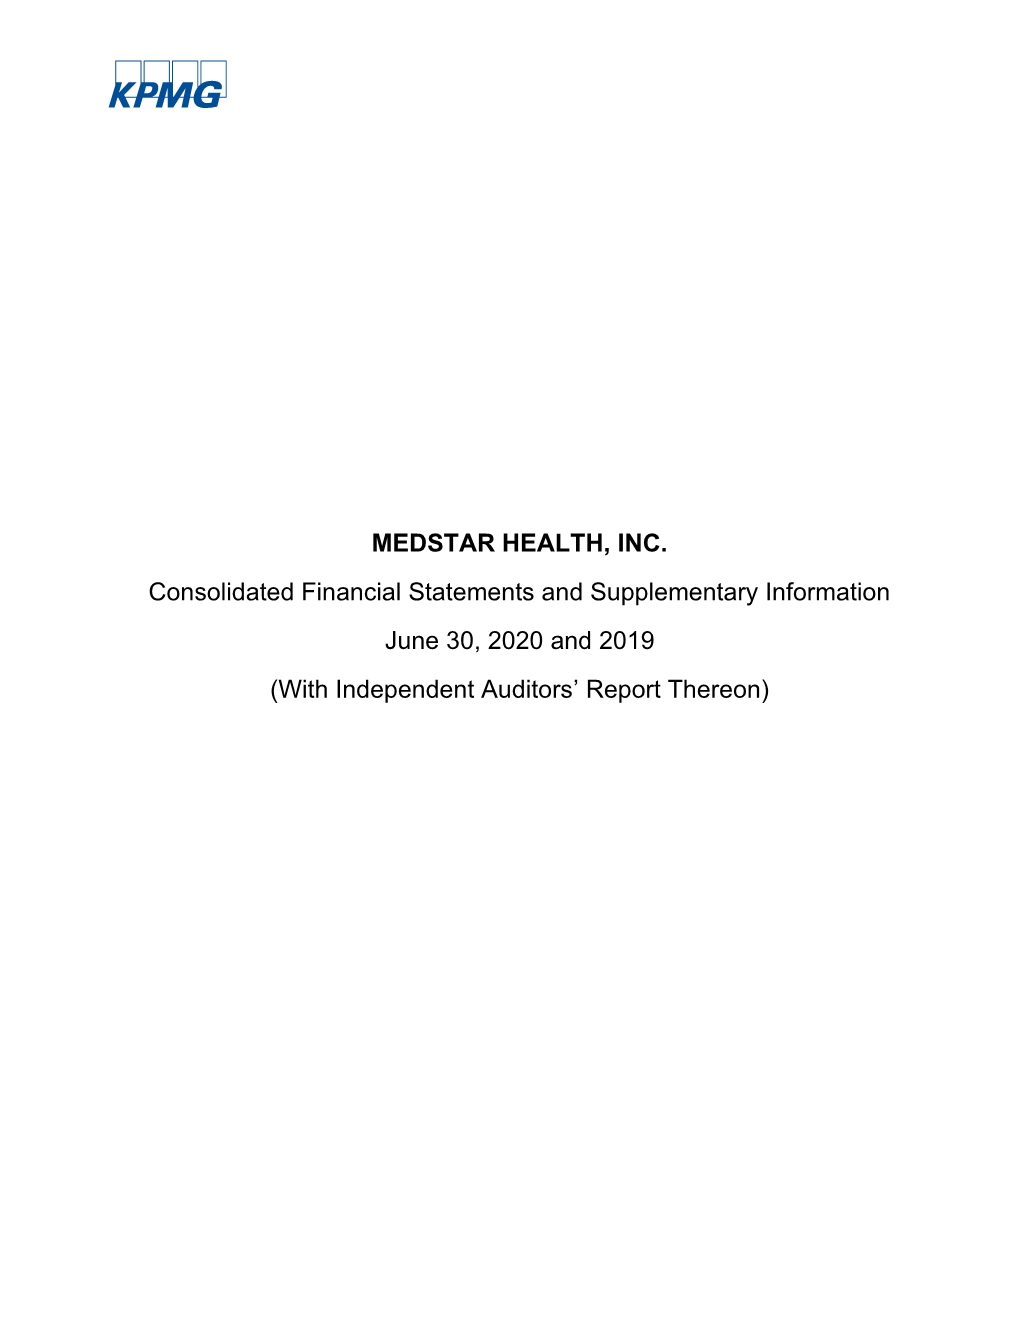 MEDSTAR HEALTH, INC. Consolidated Financial Statements and Supplementary Information June 30, 2020 and 2019 (With Independent Auditors’ Report Thereon)